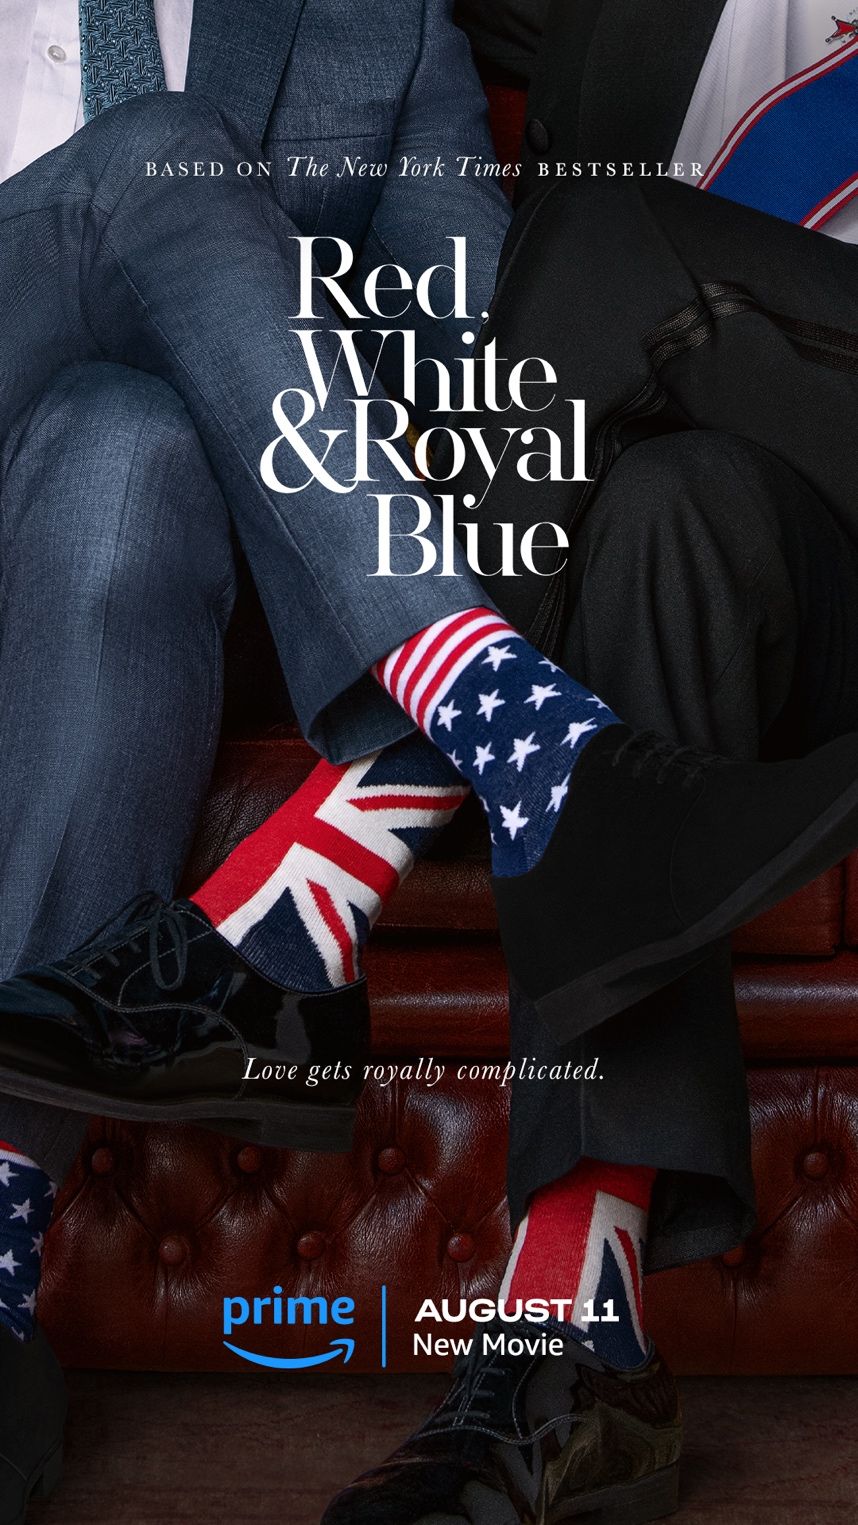 Love gets royally complicated in Red, White and Royal Blue